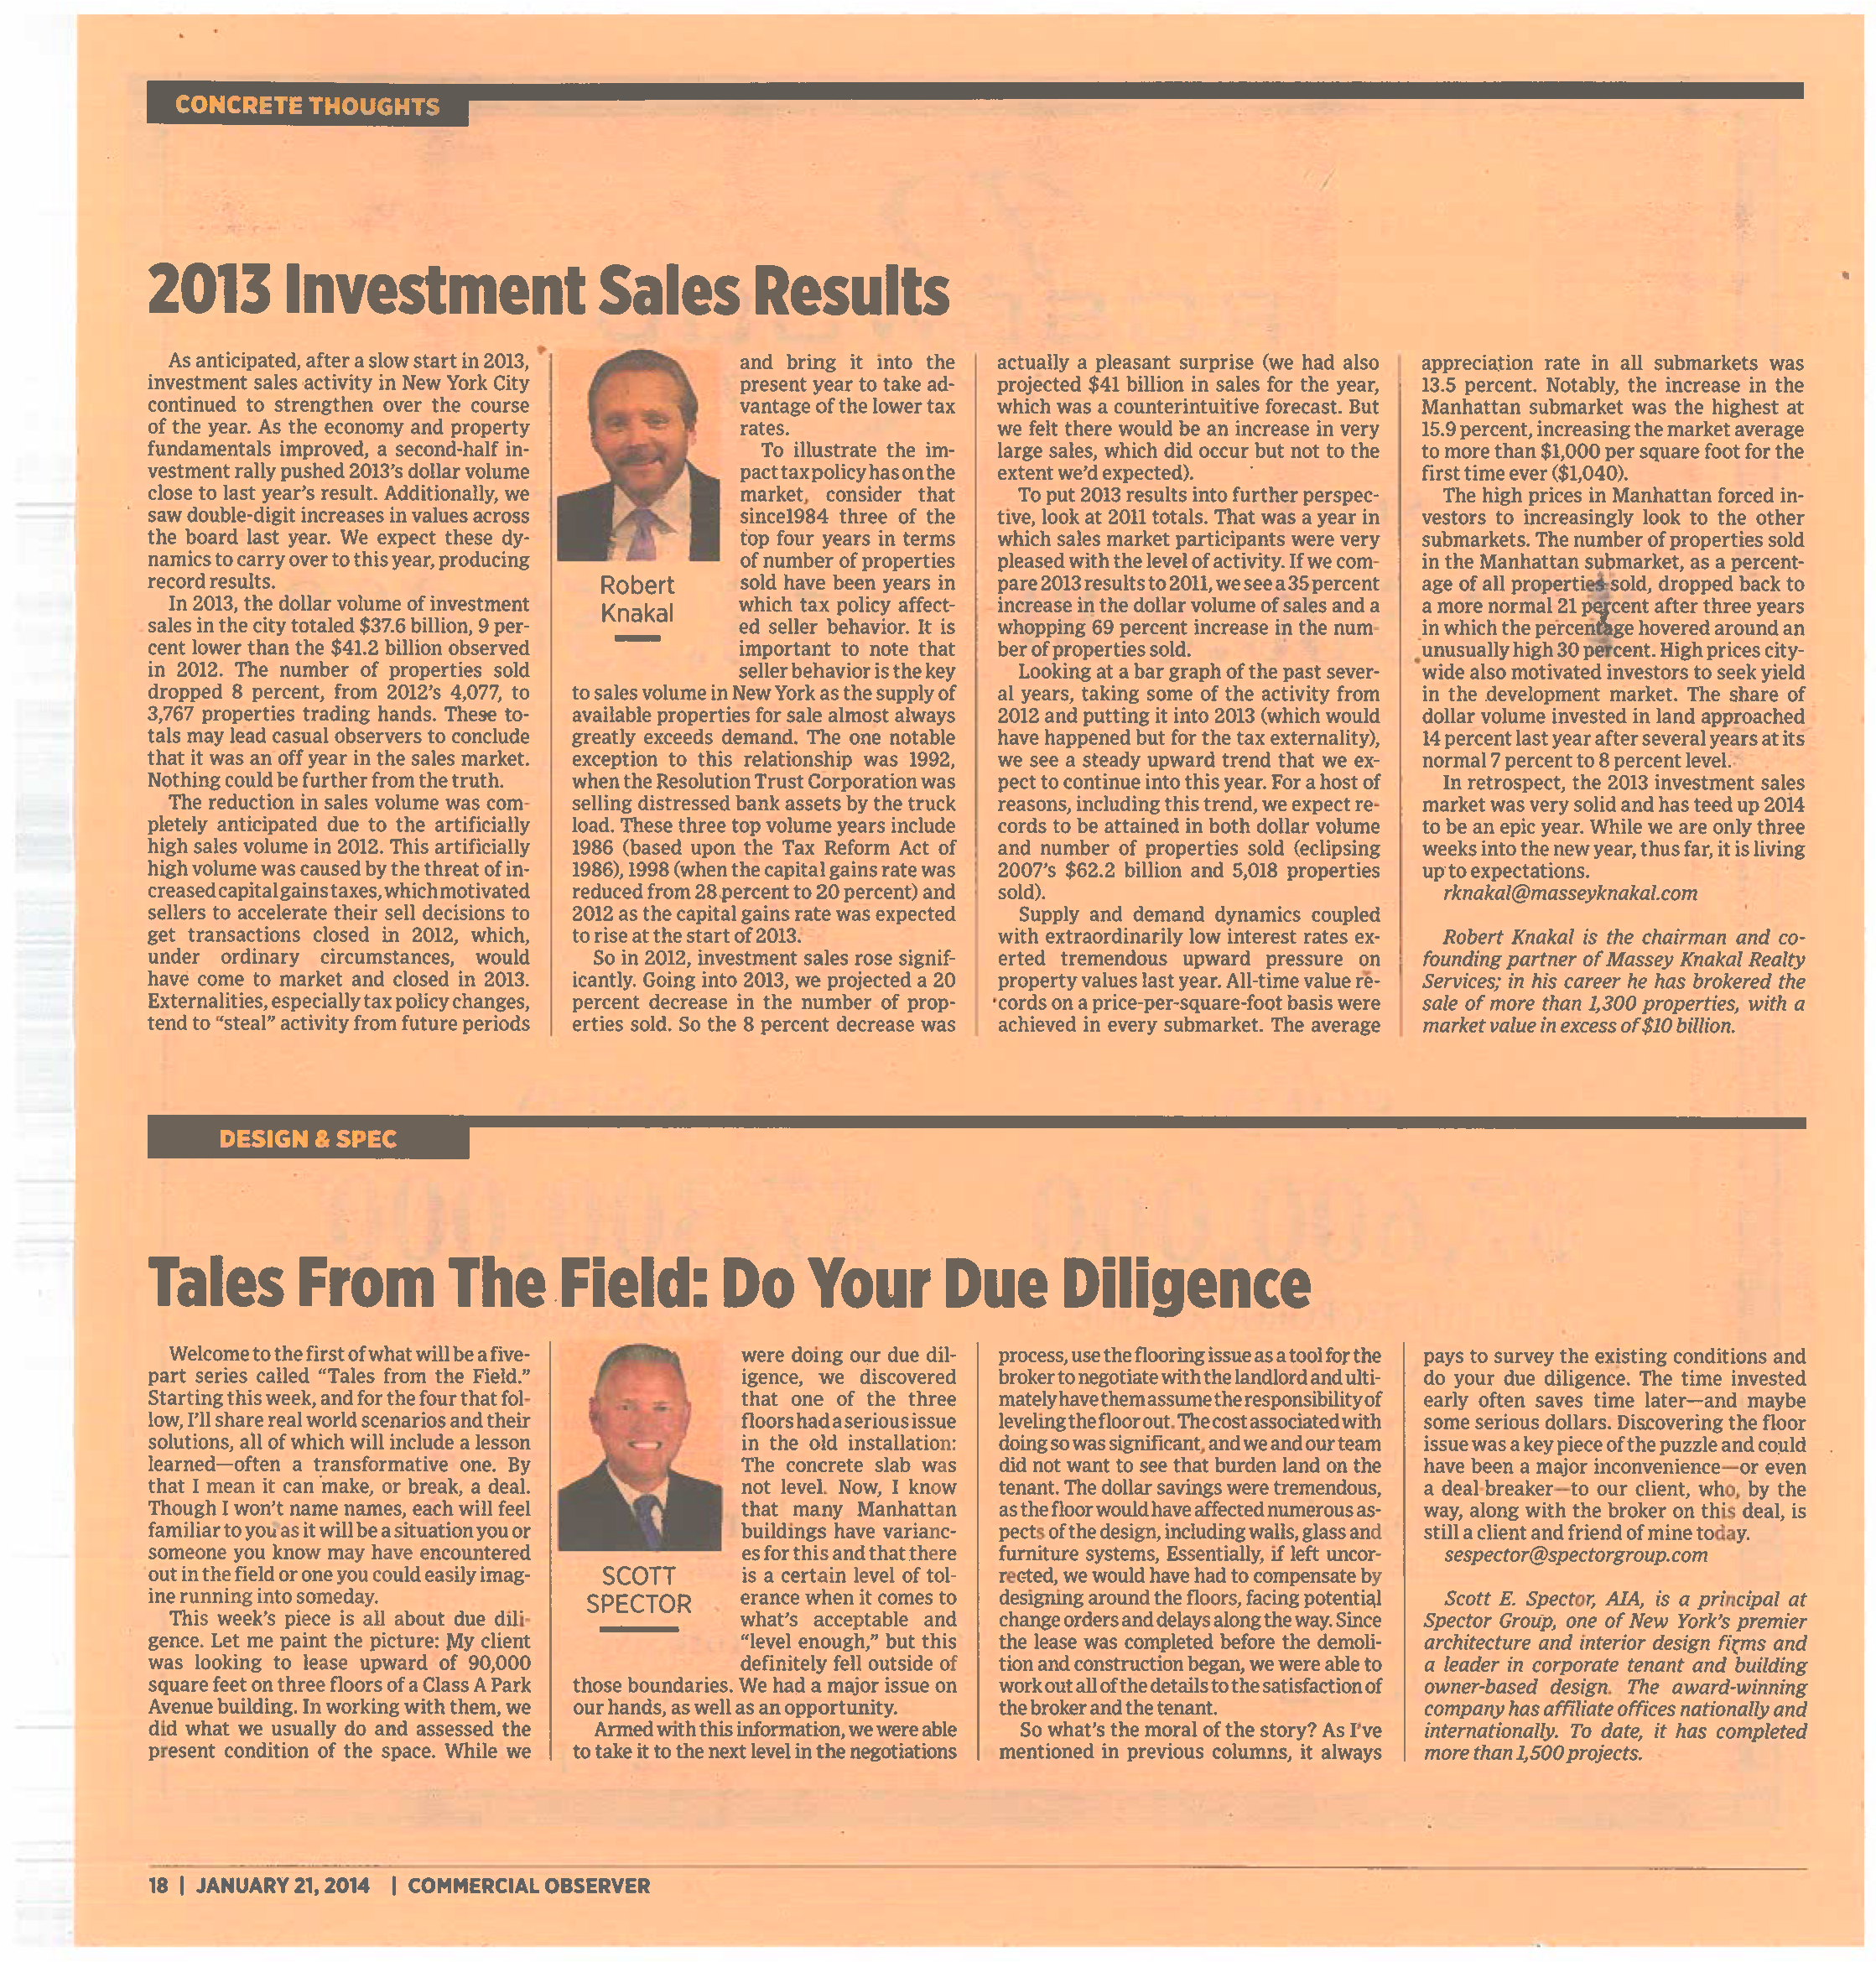 Concrete Thoughts - 2013 Investment Sales Results - Jan 21 2014